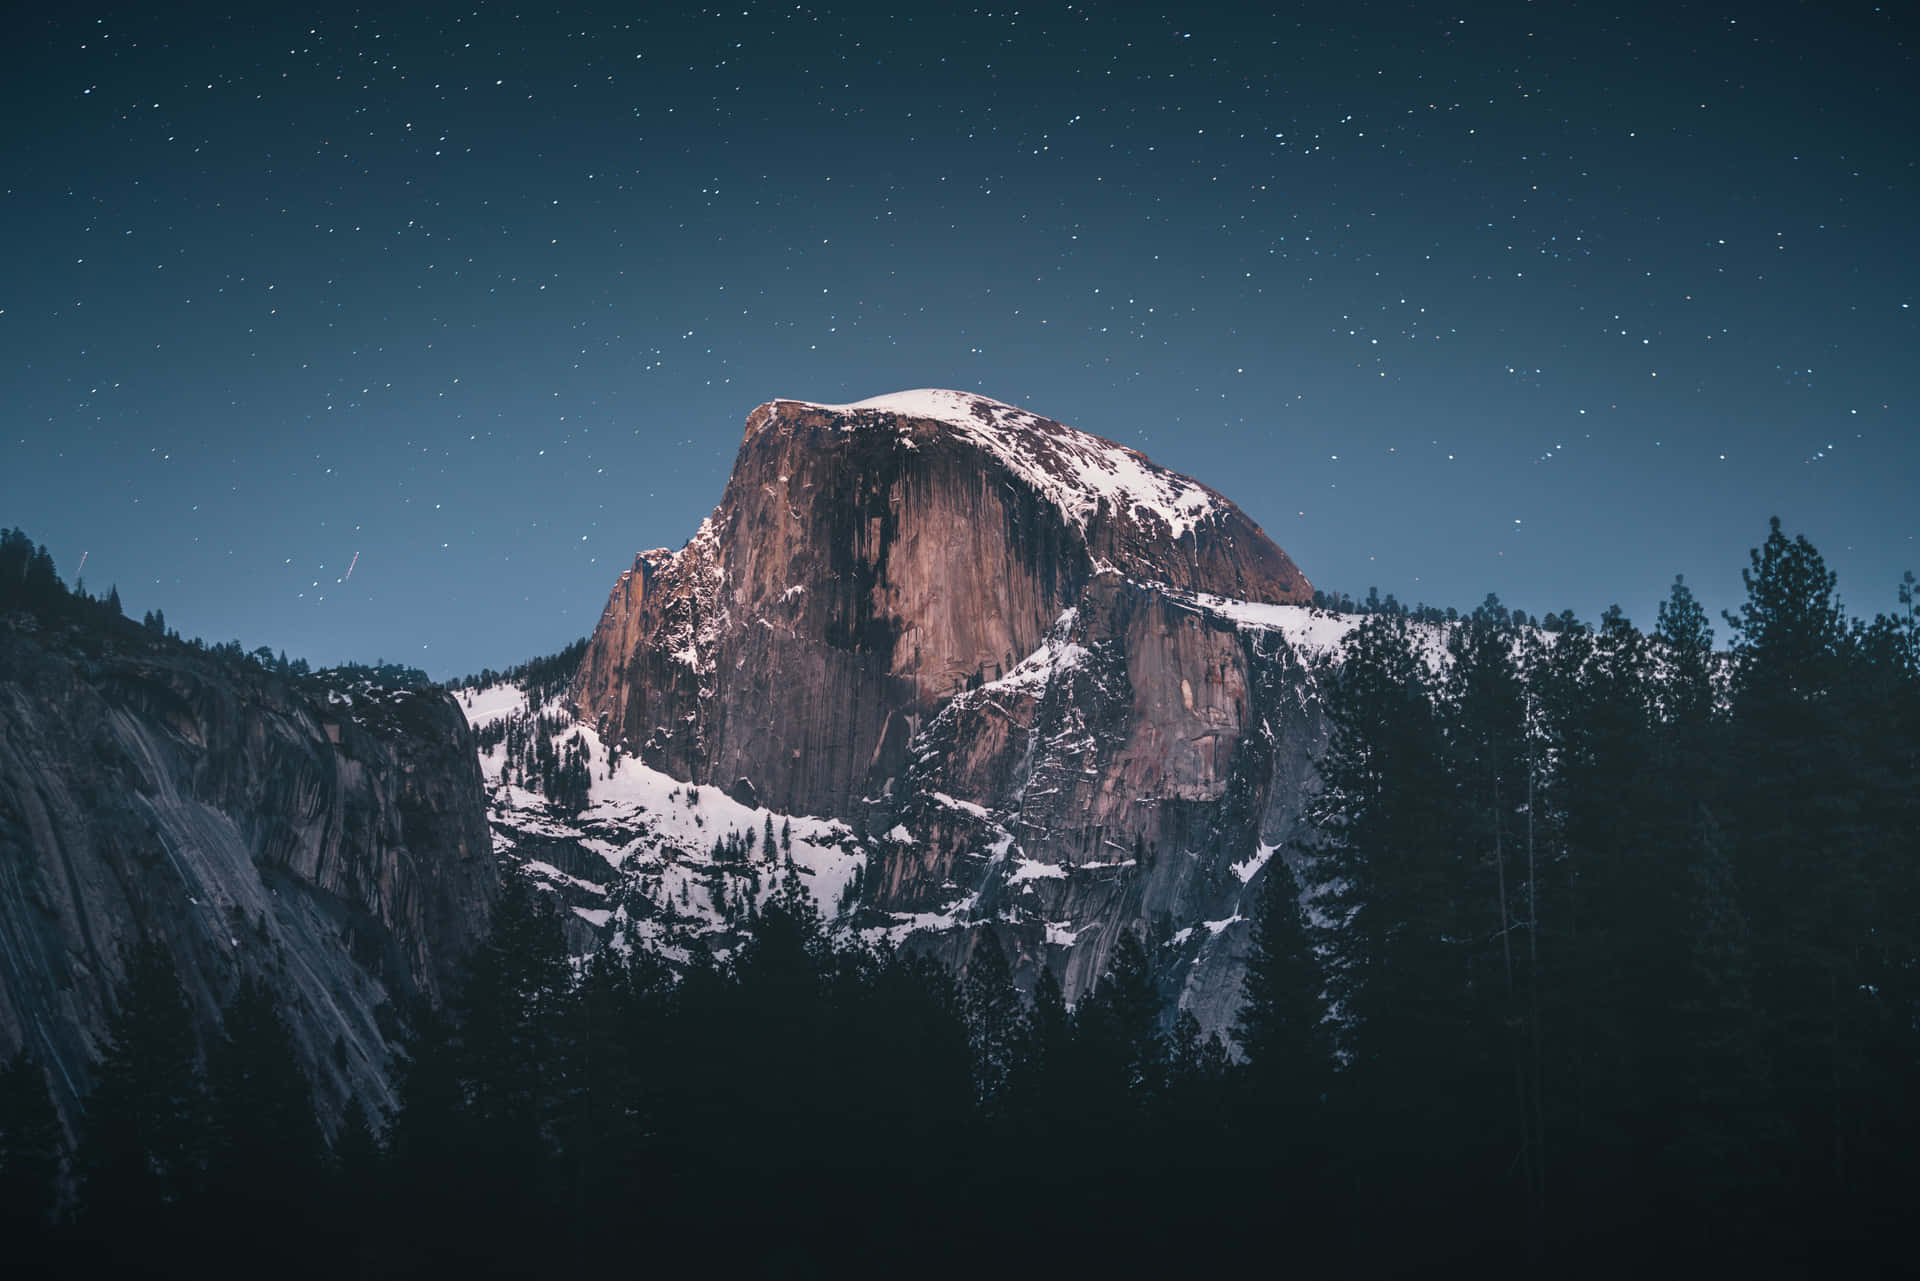 A Mountain Is Seen At Night With Stars Above It